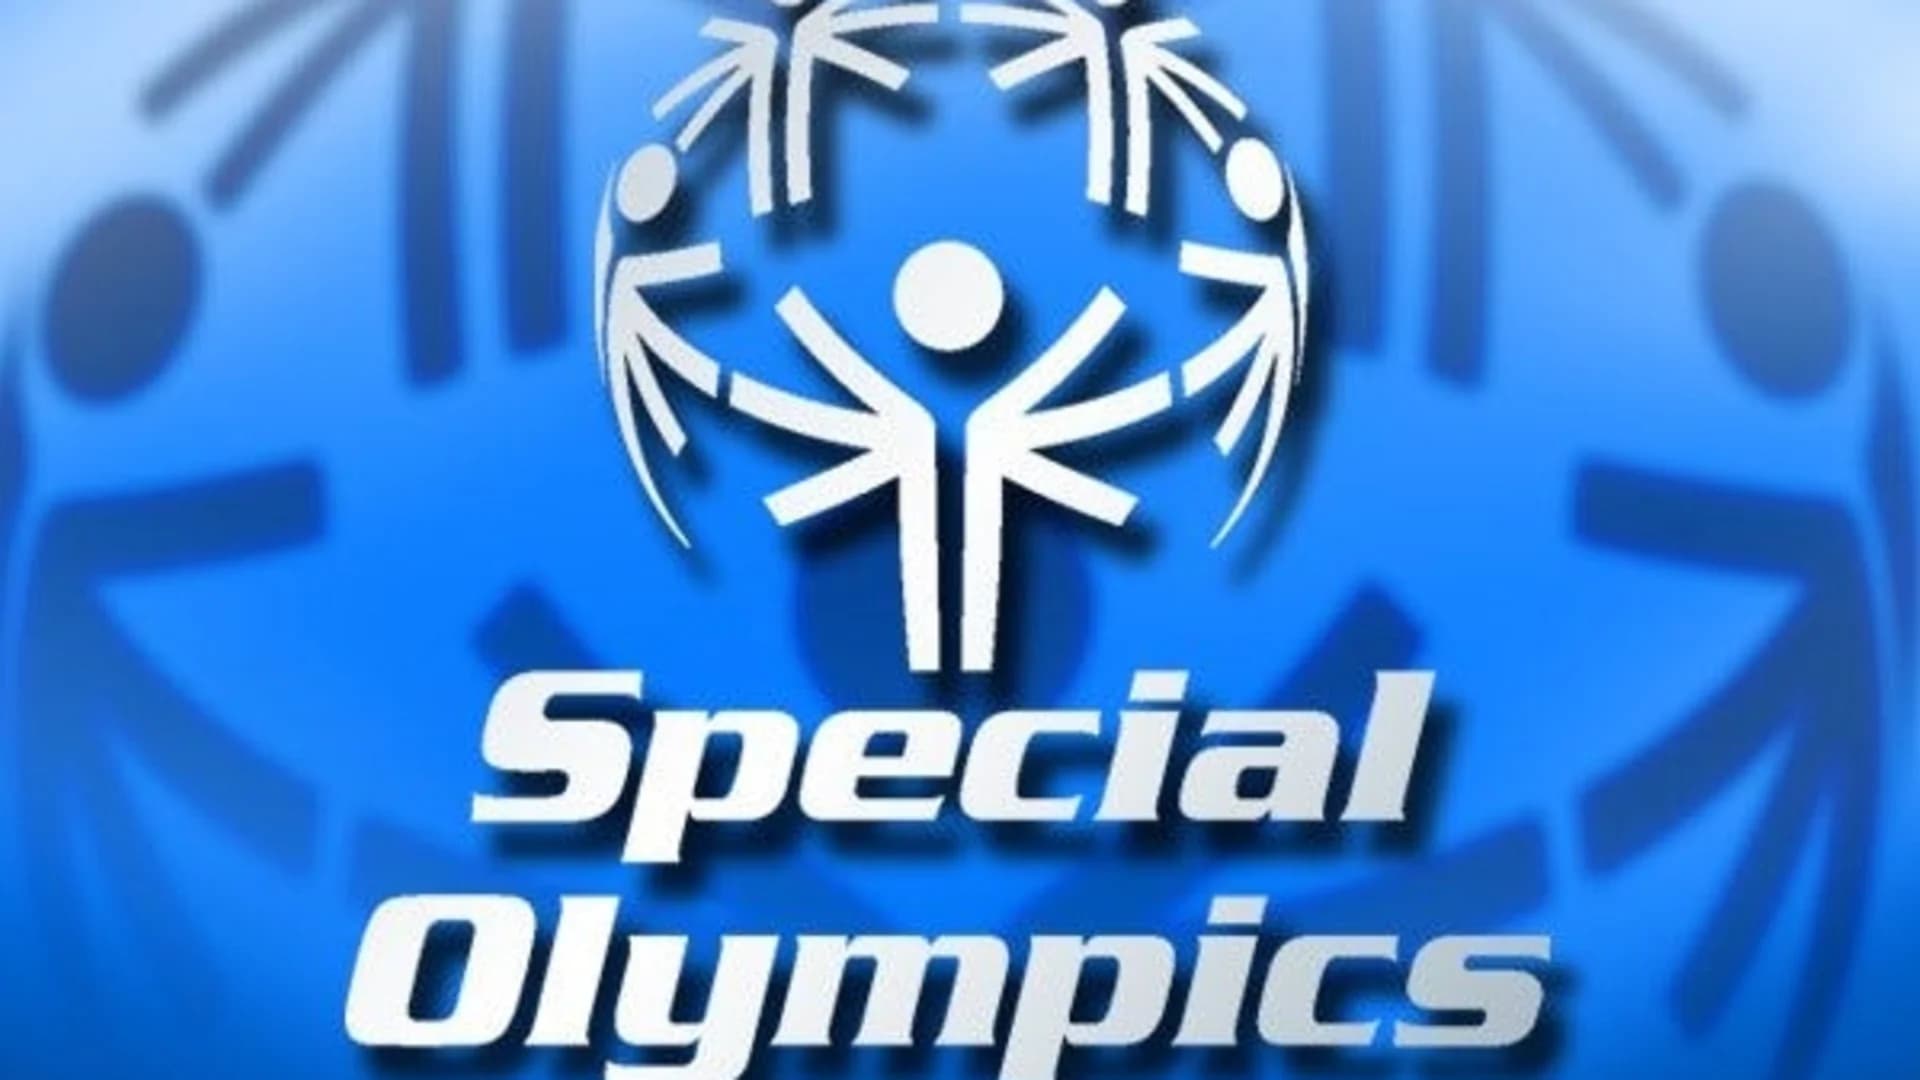 President Trump backs off proposal to cut Special Olympics funds